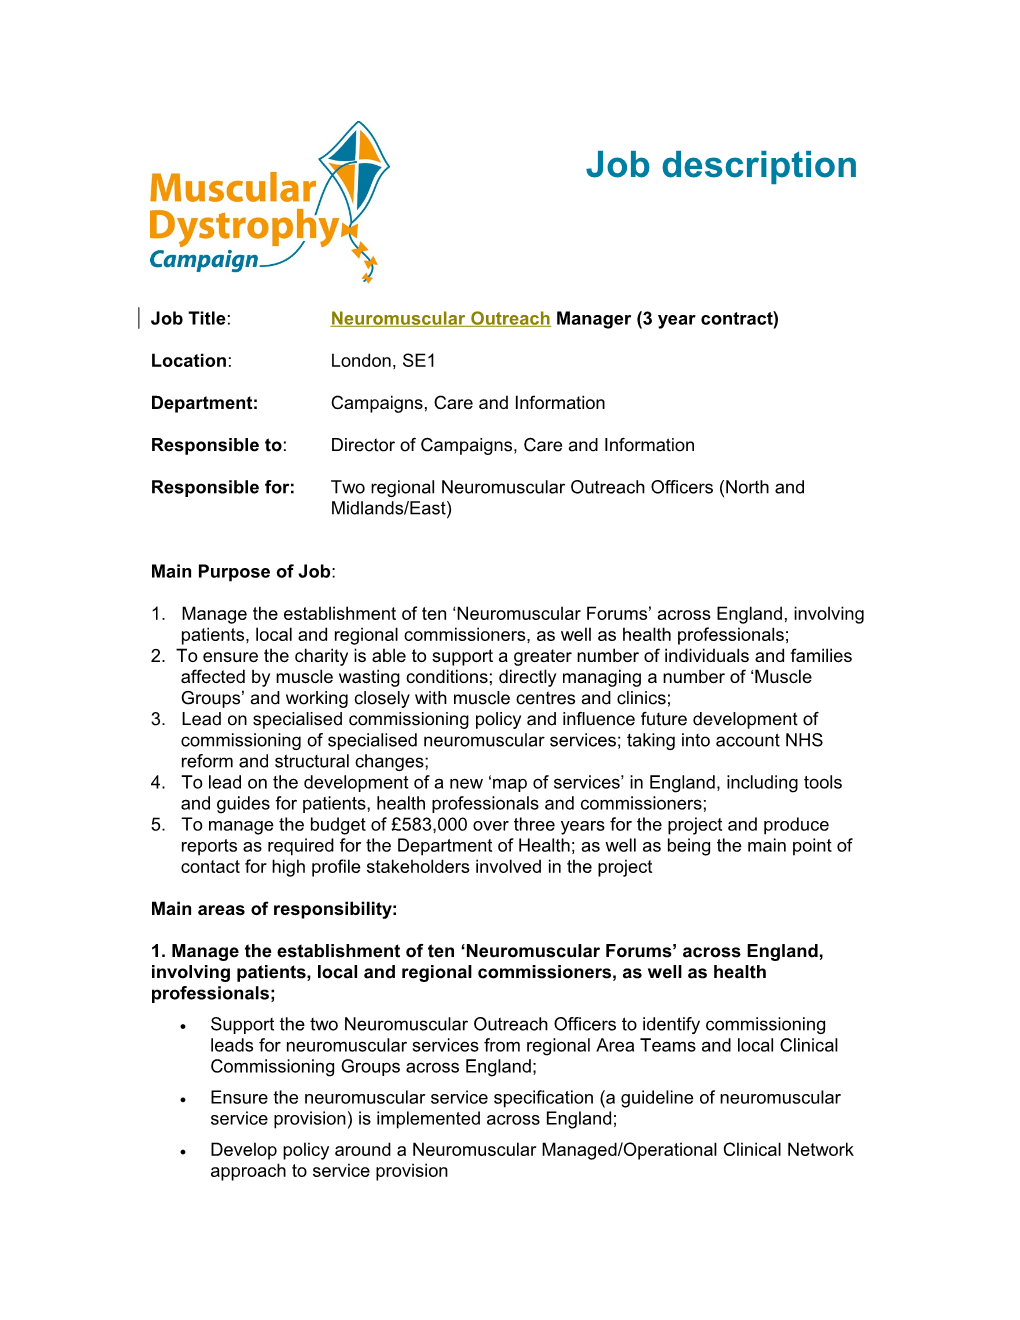 Job Title: Neuromuscular Outreach Manager (3 Year Contract)